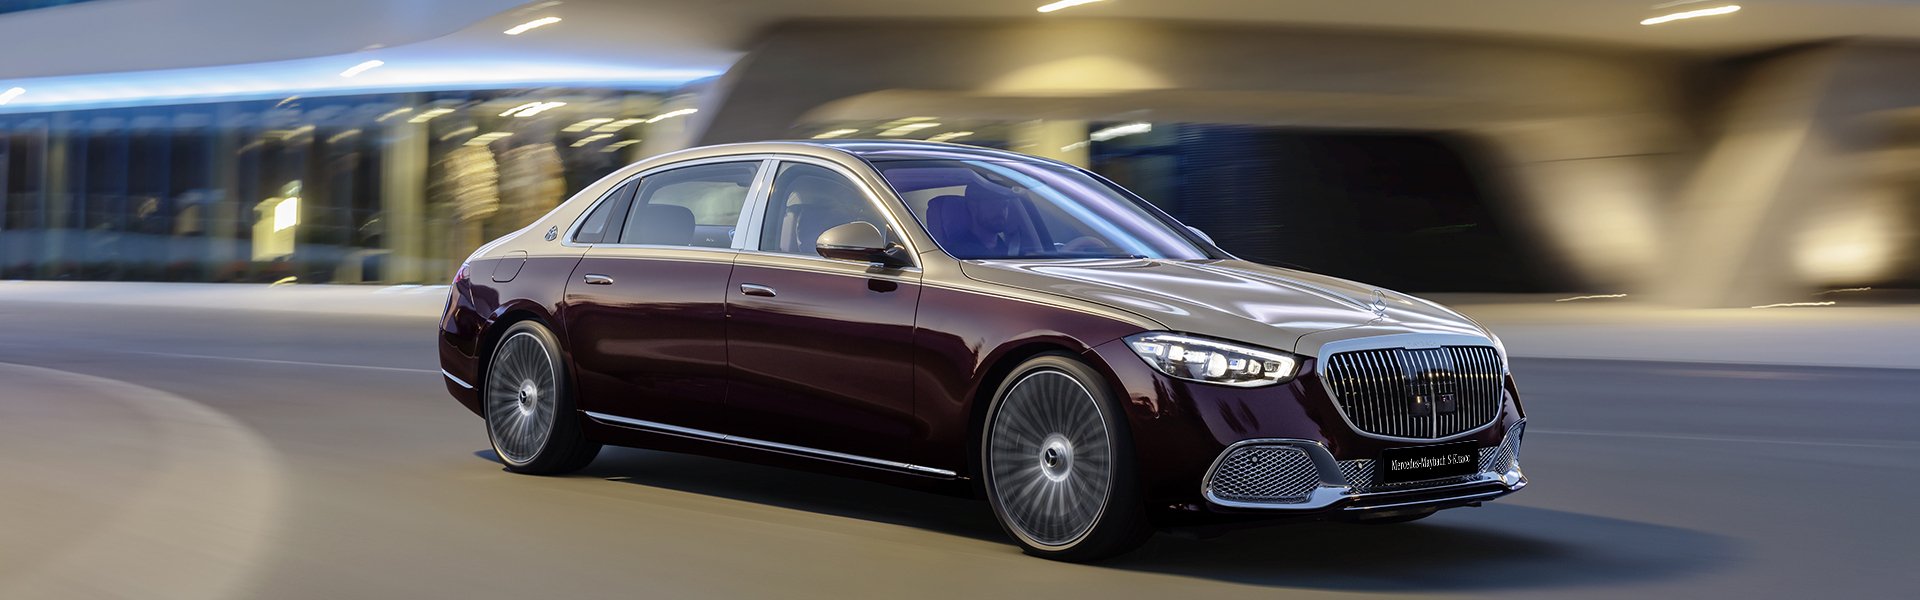 Mercedes-AMG S-Класс Maybach